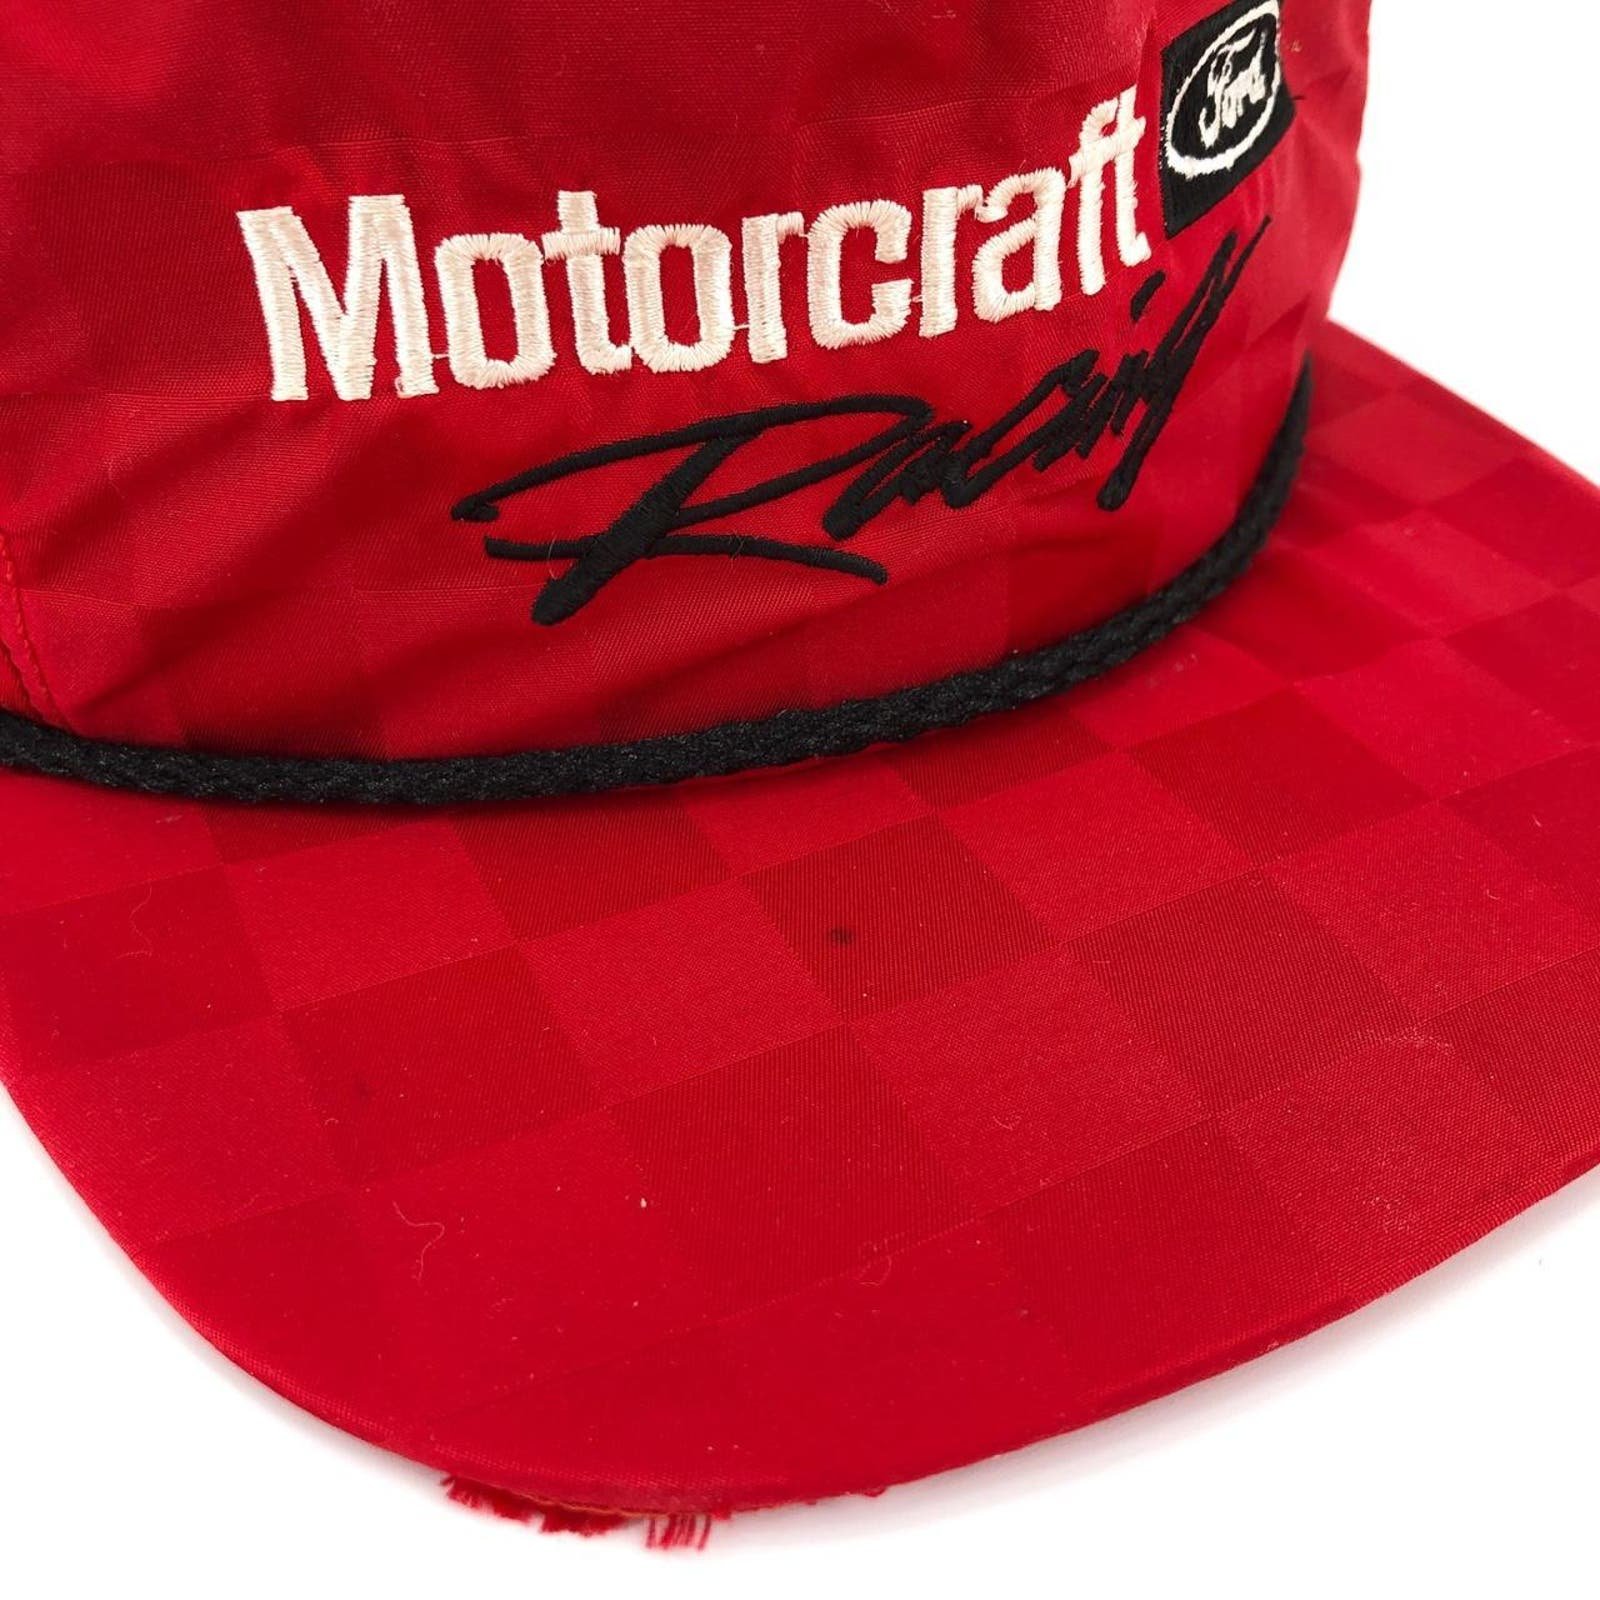 90s Ford Motorcraft Racing red checkered hat 1990s vintage gGD7nkZsW